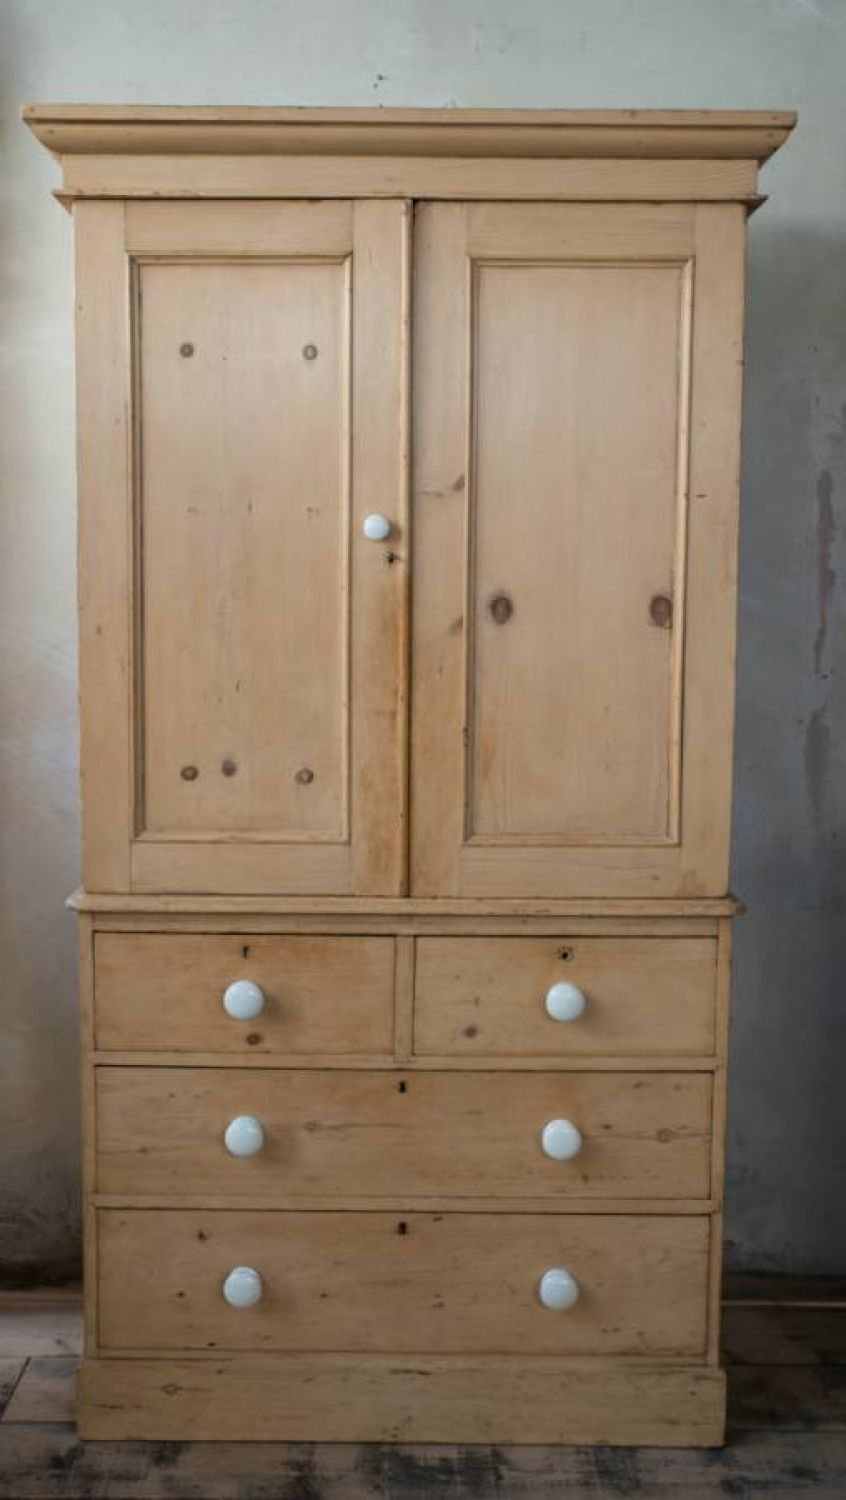 Victorian Pine Wardrobes In Most Up To Date Mid Victorian Pine Linen Press In Furniture (View 7 of 15)